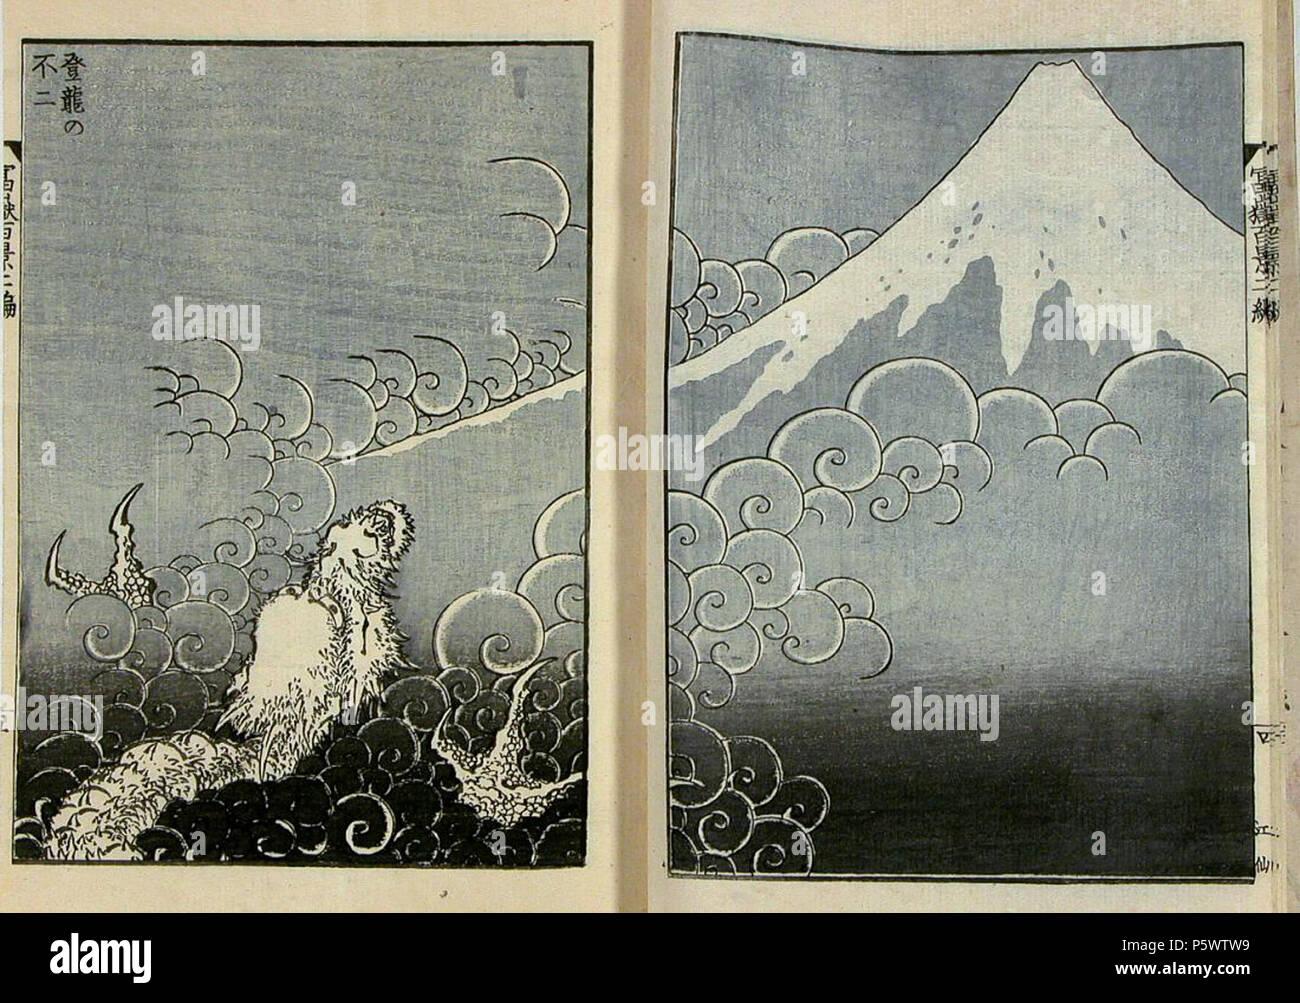 N/A. English: Katsushika Hokusai, Dragon ascending Mount Fuji from 'One Hundred Views of Mount Fuji' (Fugaku hyakkei), a woodblock print. Japan, Edo period, published AD 1835. Woodblock-printed book in three volumes, published by Seirind, Edo (and others). (http://www.britishmuseum.org/explore/highlights/highlight objects/asia/k/katsushika hokusai, dragon asc.aspx) . 1835.   Katsushika Hokusai  (1760–1849)      Alternative names Birth name: Tokitar ()  Description Japanese painter, draughtsman and printmaker  Date of birth/death 31 October 1760 10 May 1849  Location of birth/death Edo, today T Stock Photo